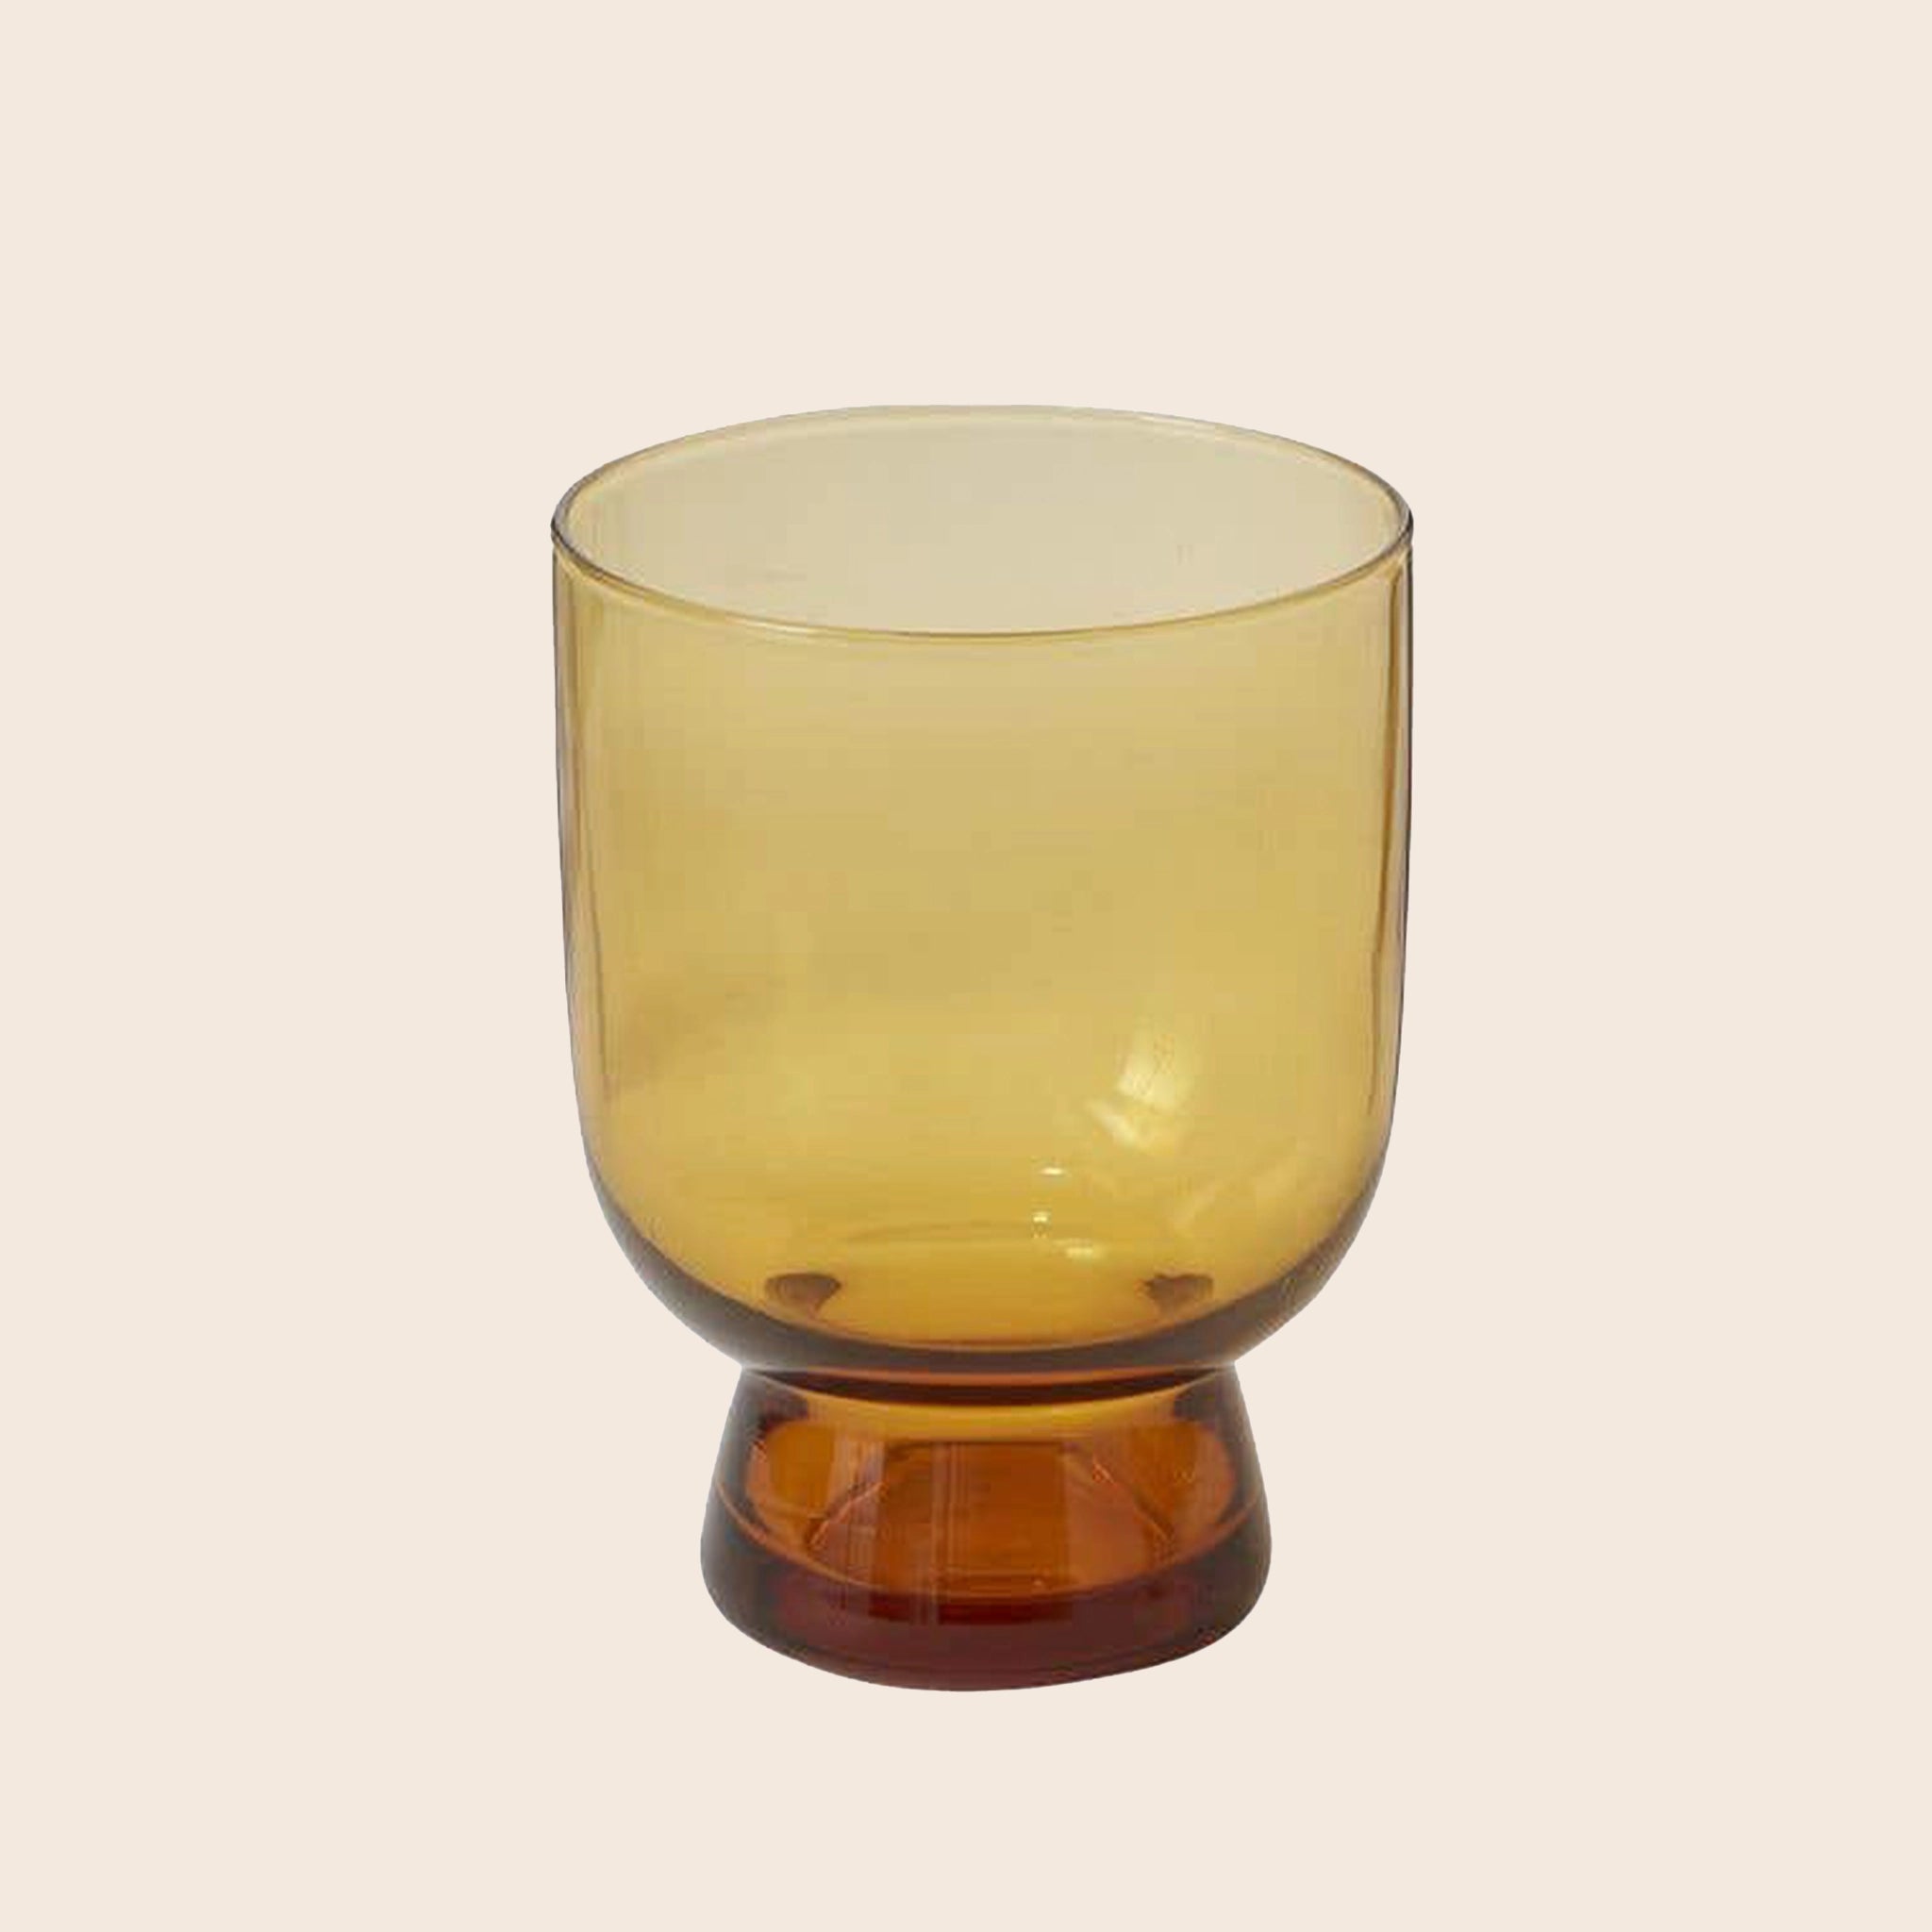 A glass cup with an amber hue and a pedestal at the bottom. 